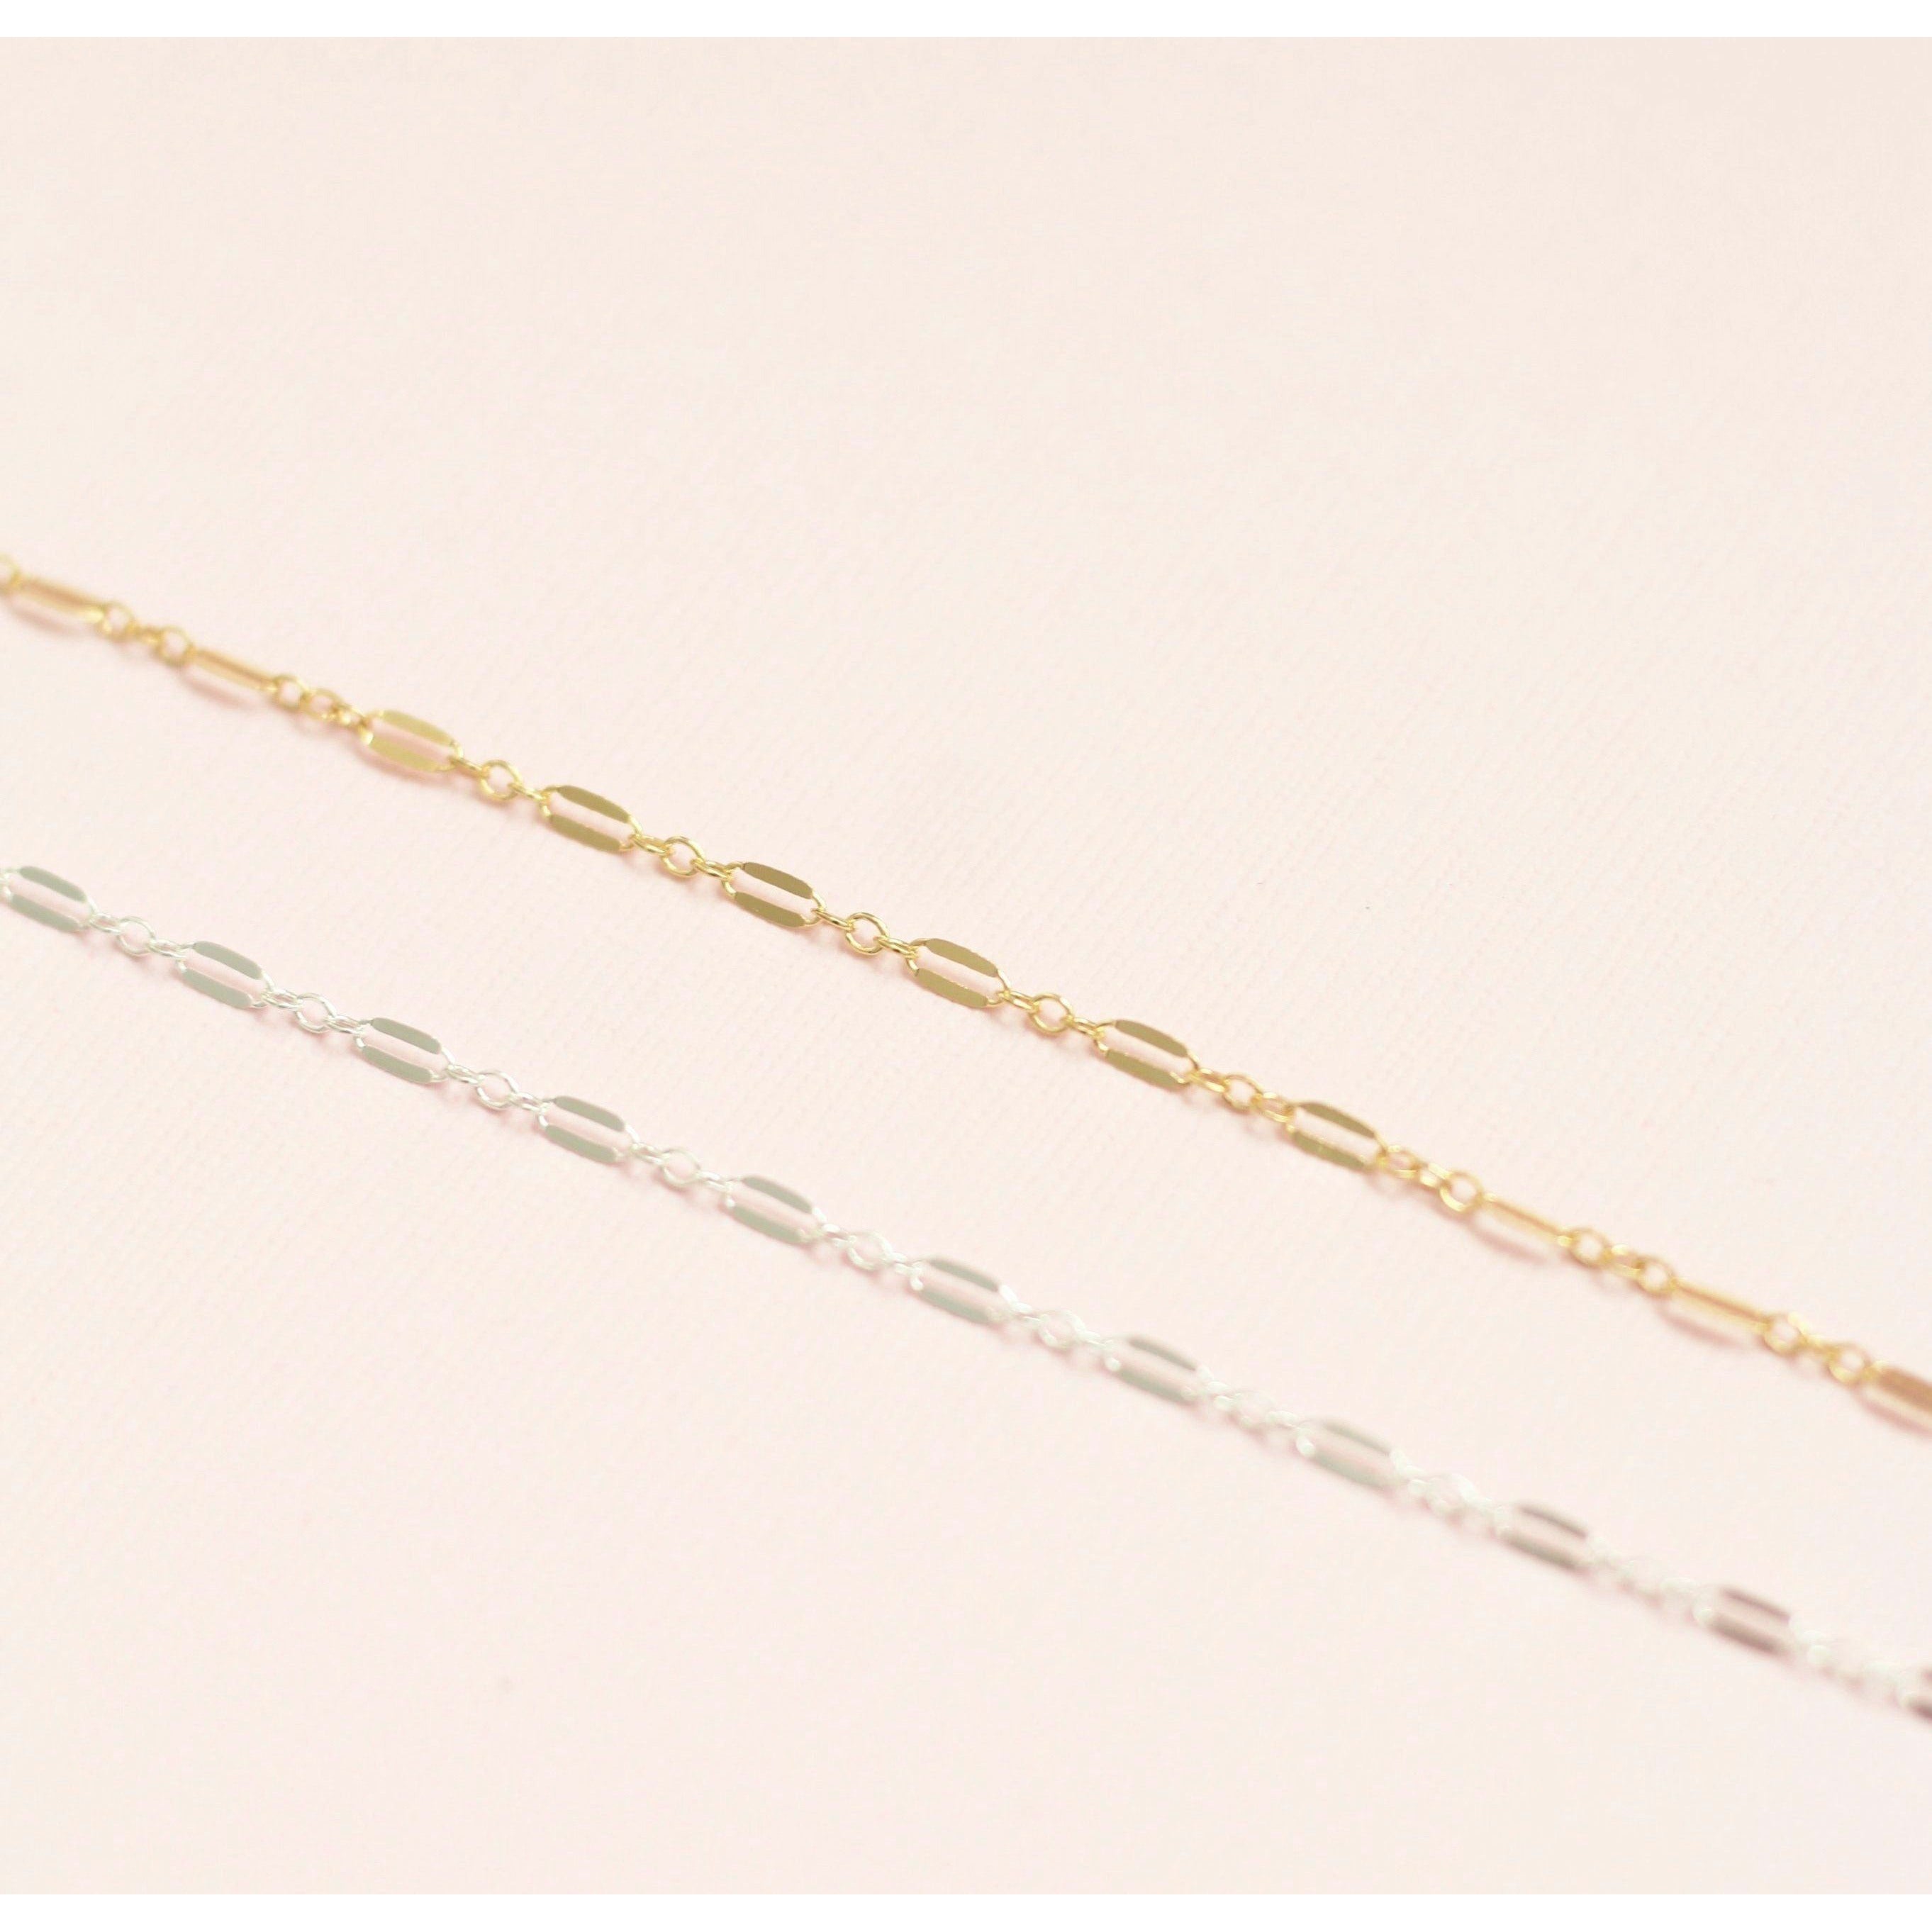 handmade sterling silver and gold sparkle chokers 